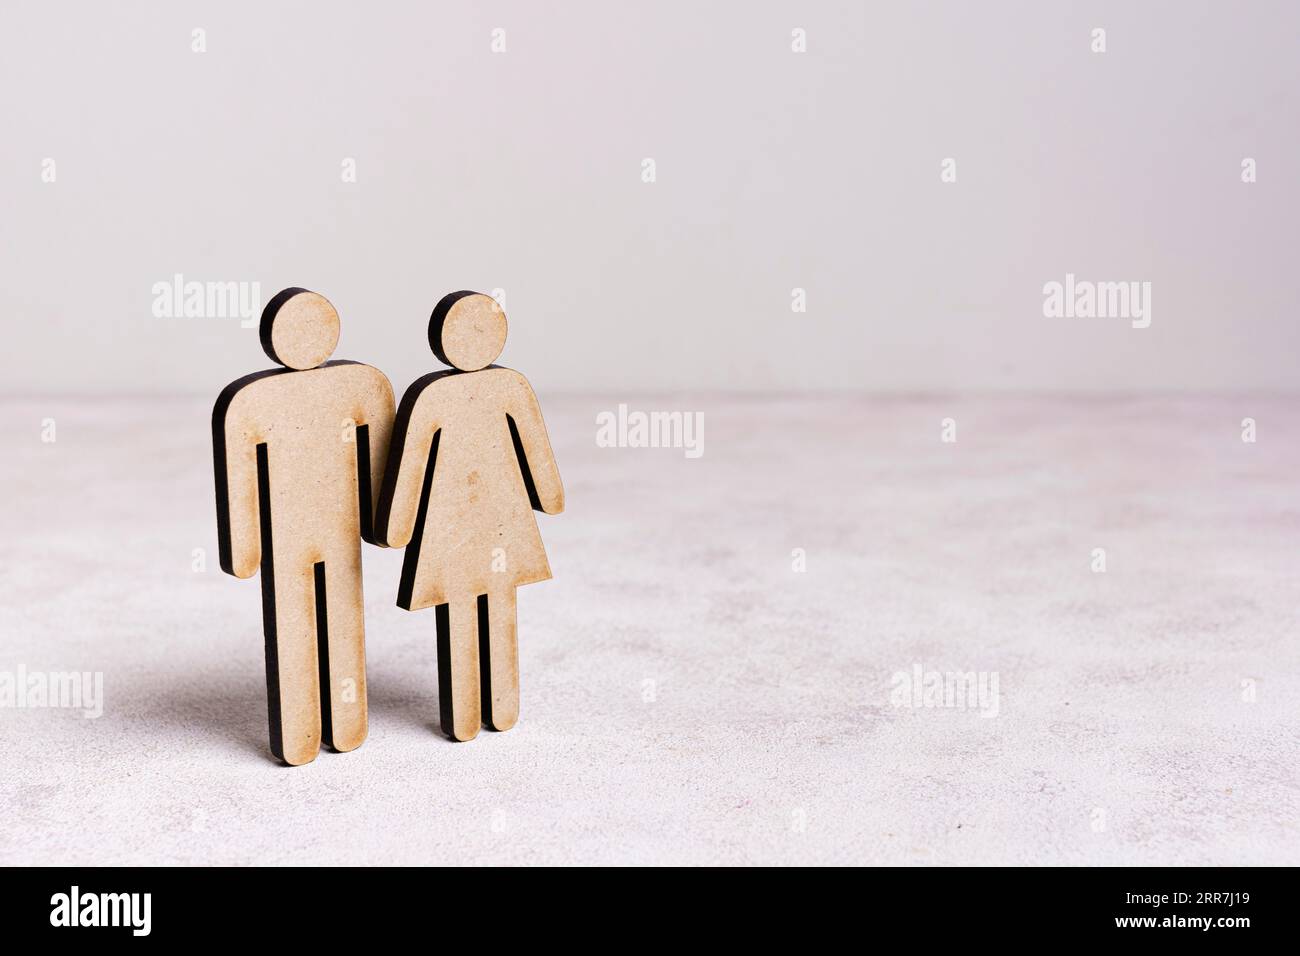 Cardboard man woman equality concept with copy space Stock Photo